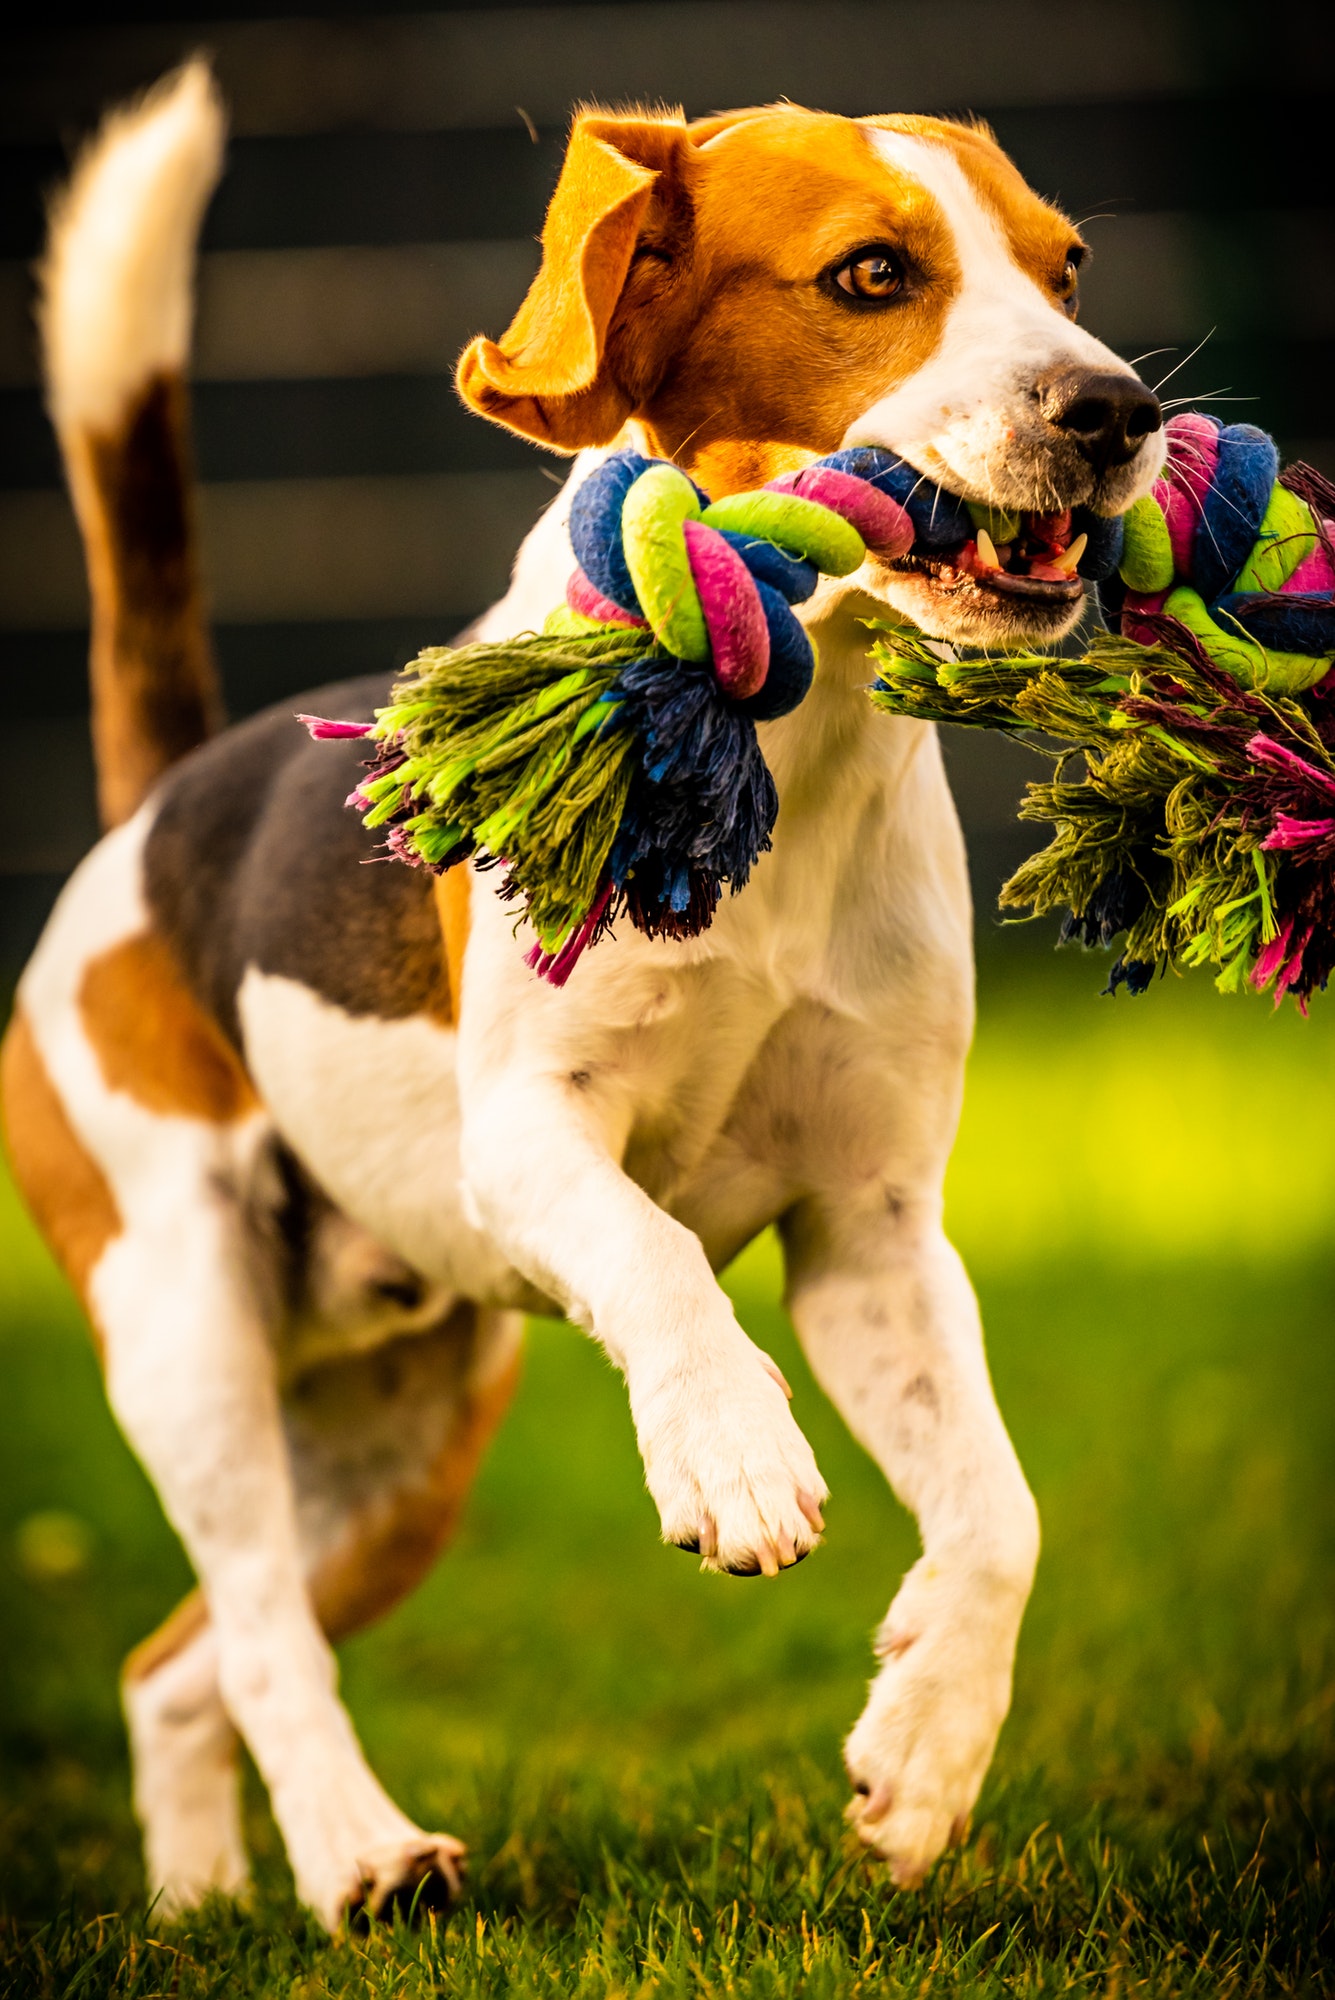 Beagle dog jumping and running with a toy towards the camera